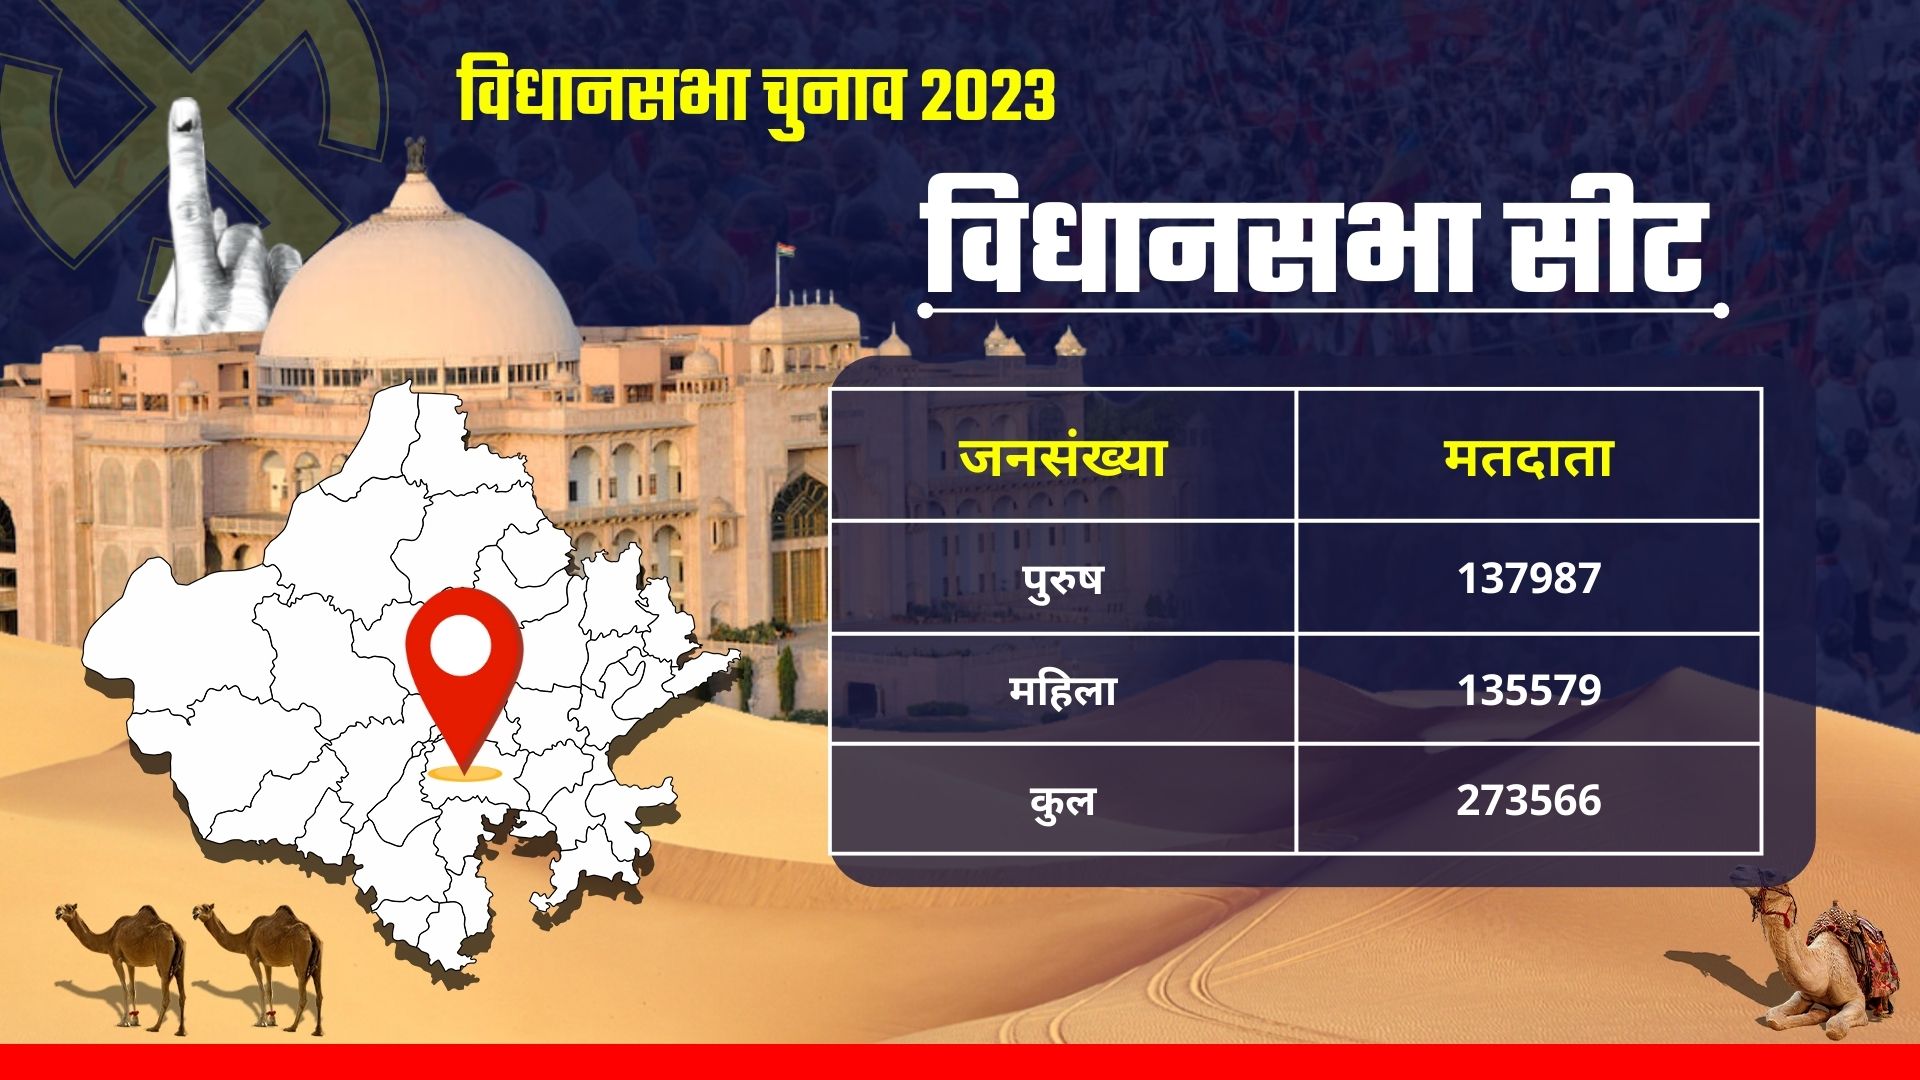 RAJASTHAN SEAT SCAN,  Asind ASSEMBLY CONSTITUENCY